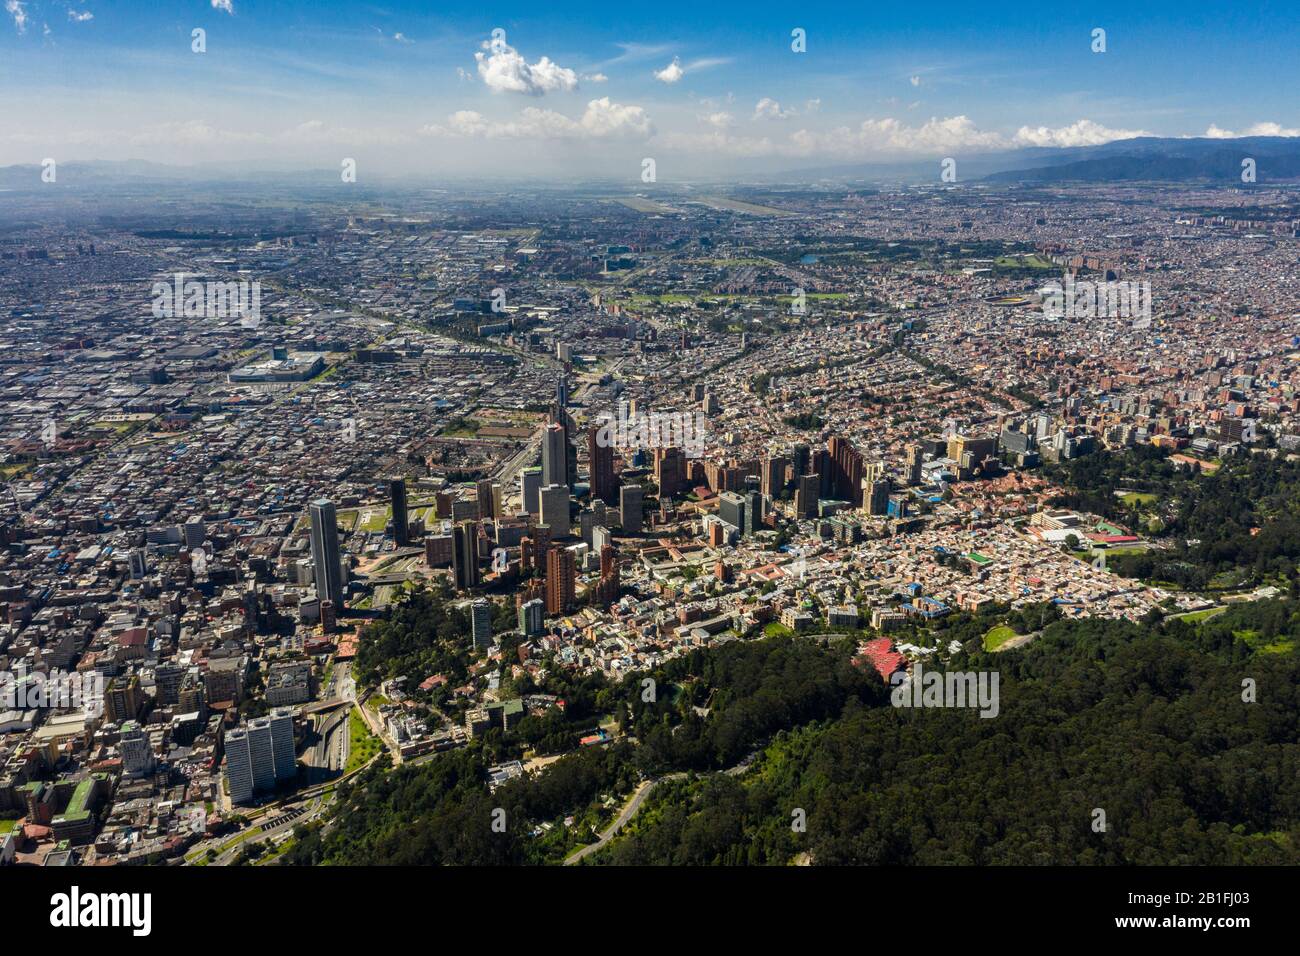 Aerial view of a panoramic view of the city of Bogota. Stock Photo